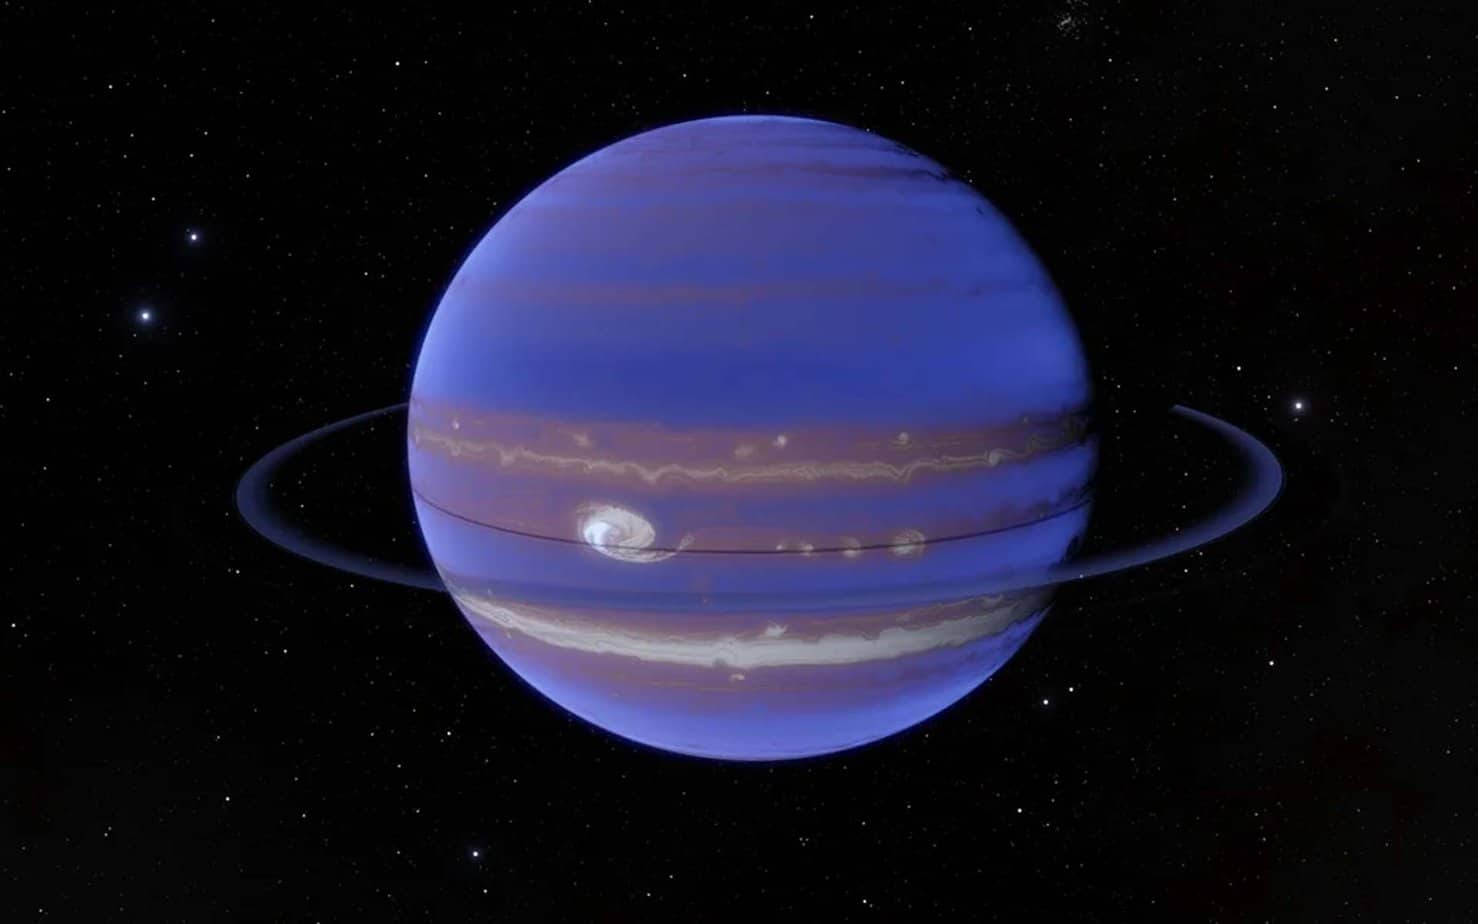 WE HAVE NEIGHBORS IN SPACE- Several minor planets discovered passed Neptune